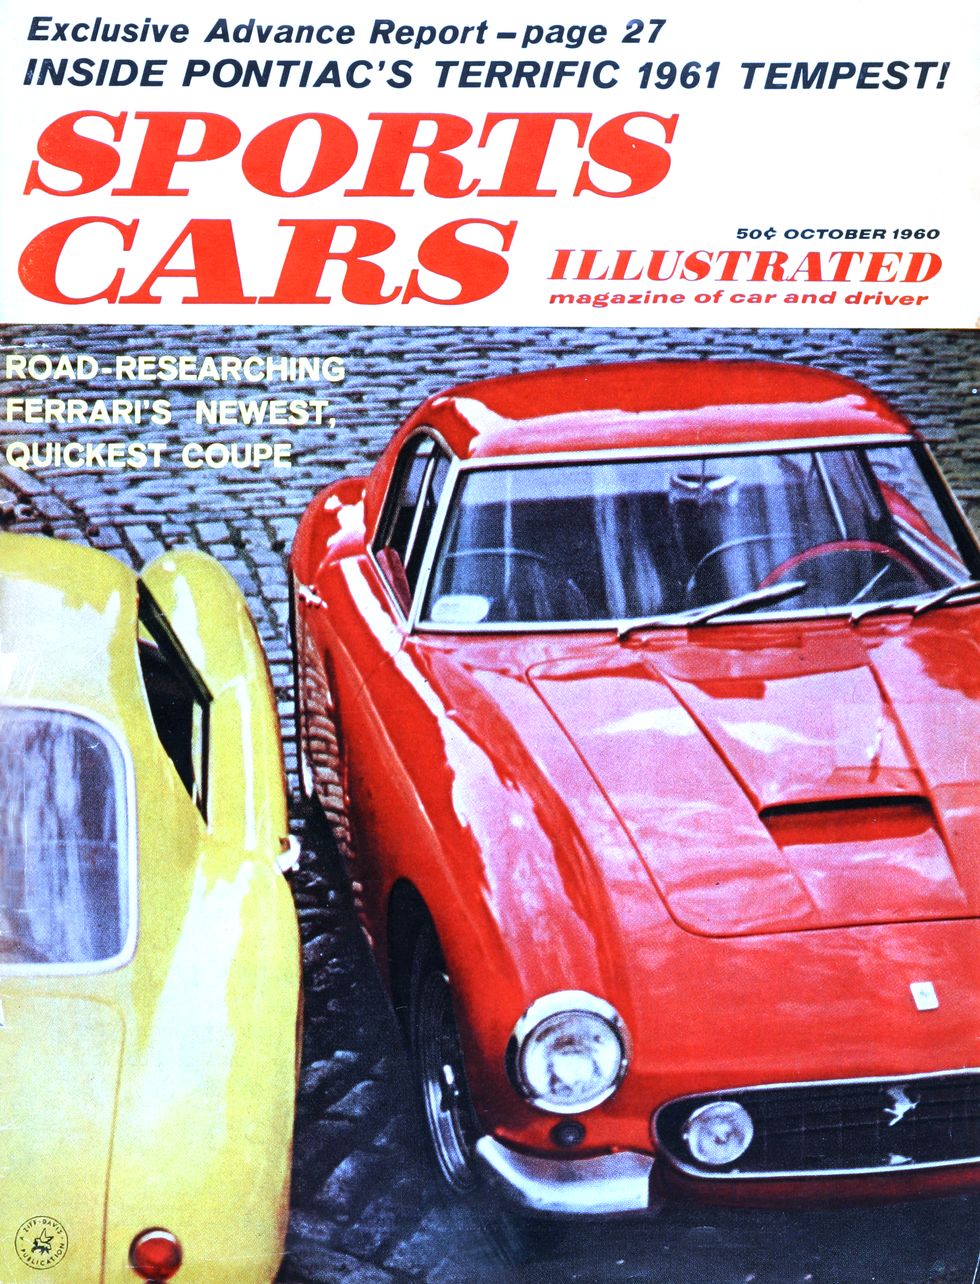 Getting Groovy and into the Groove: The Car and Driver Covers of the 1960s